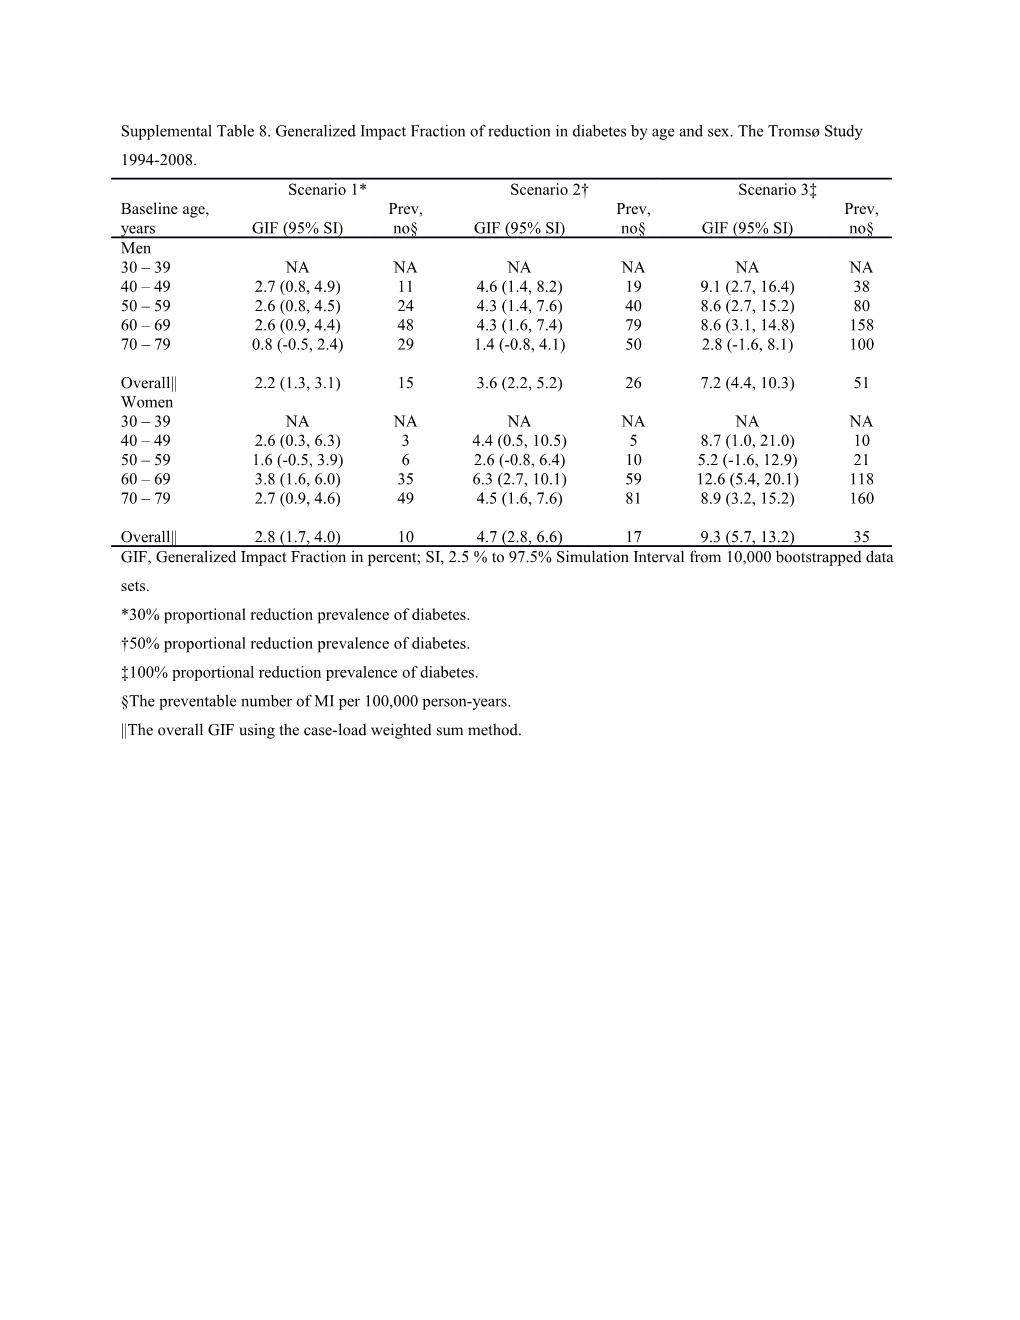 Supplemental Table 8. Generalized Impact Fraction of Reduction in Diabetes by Age and Sex